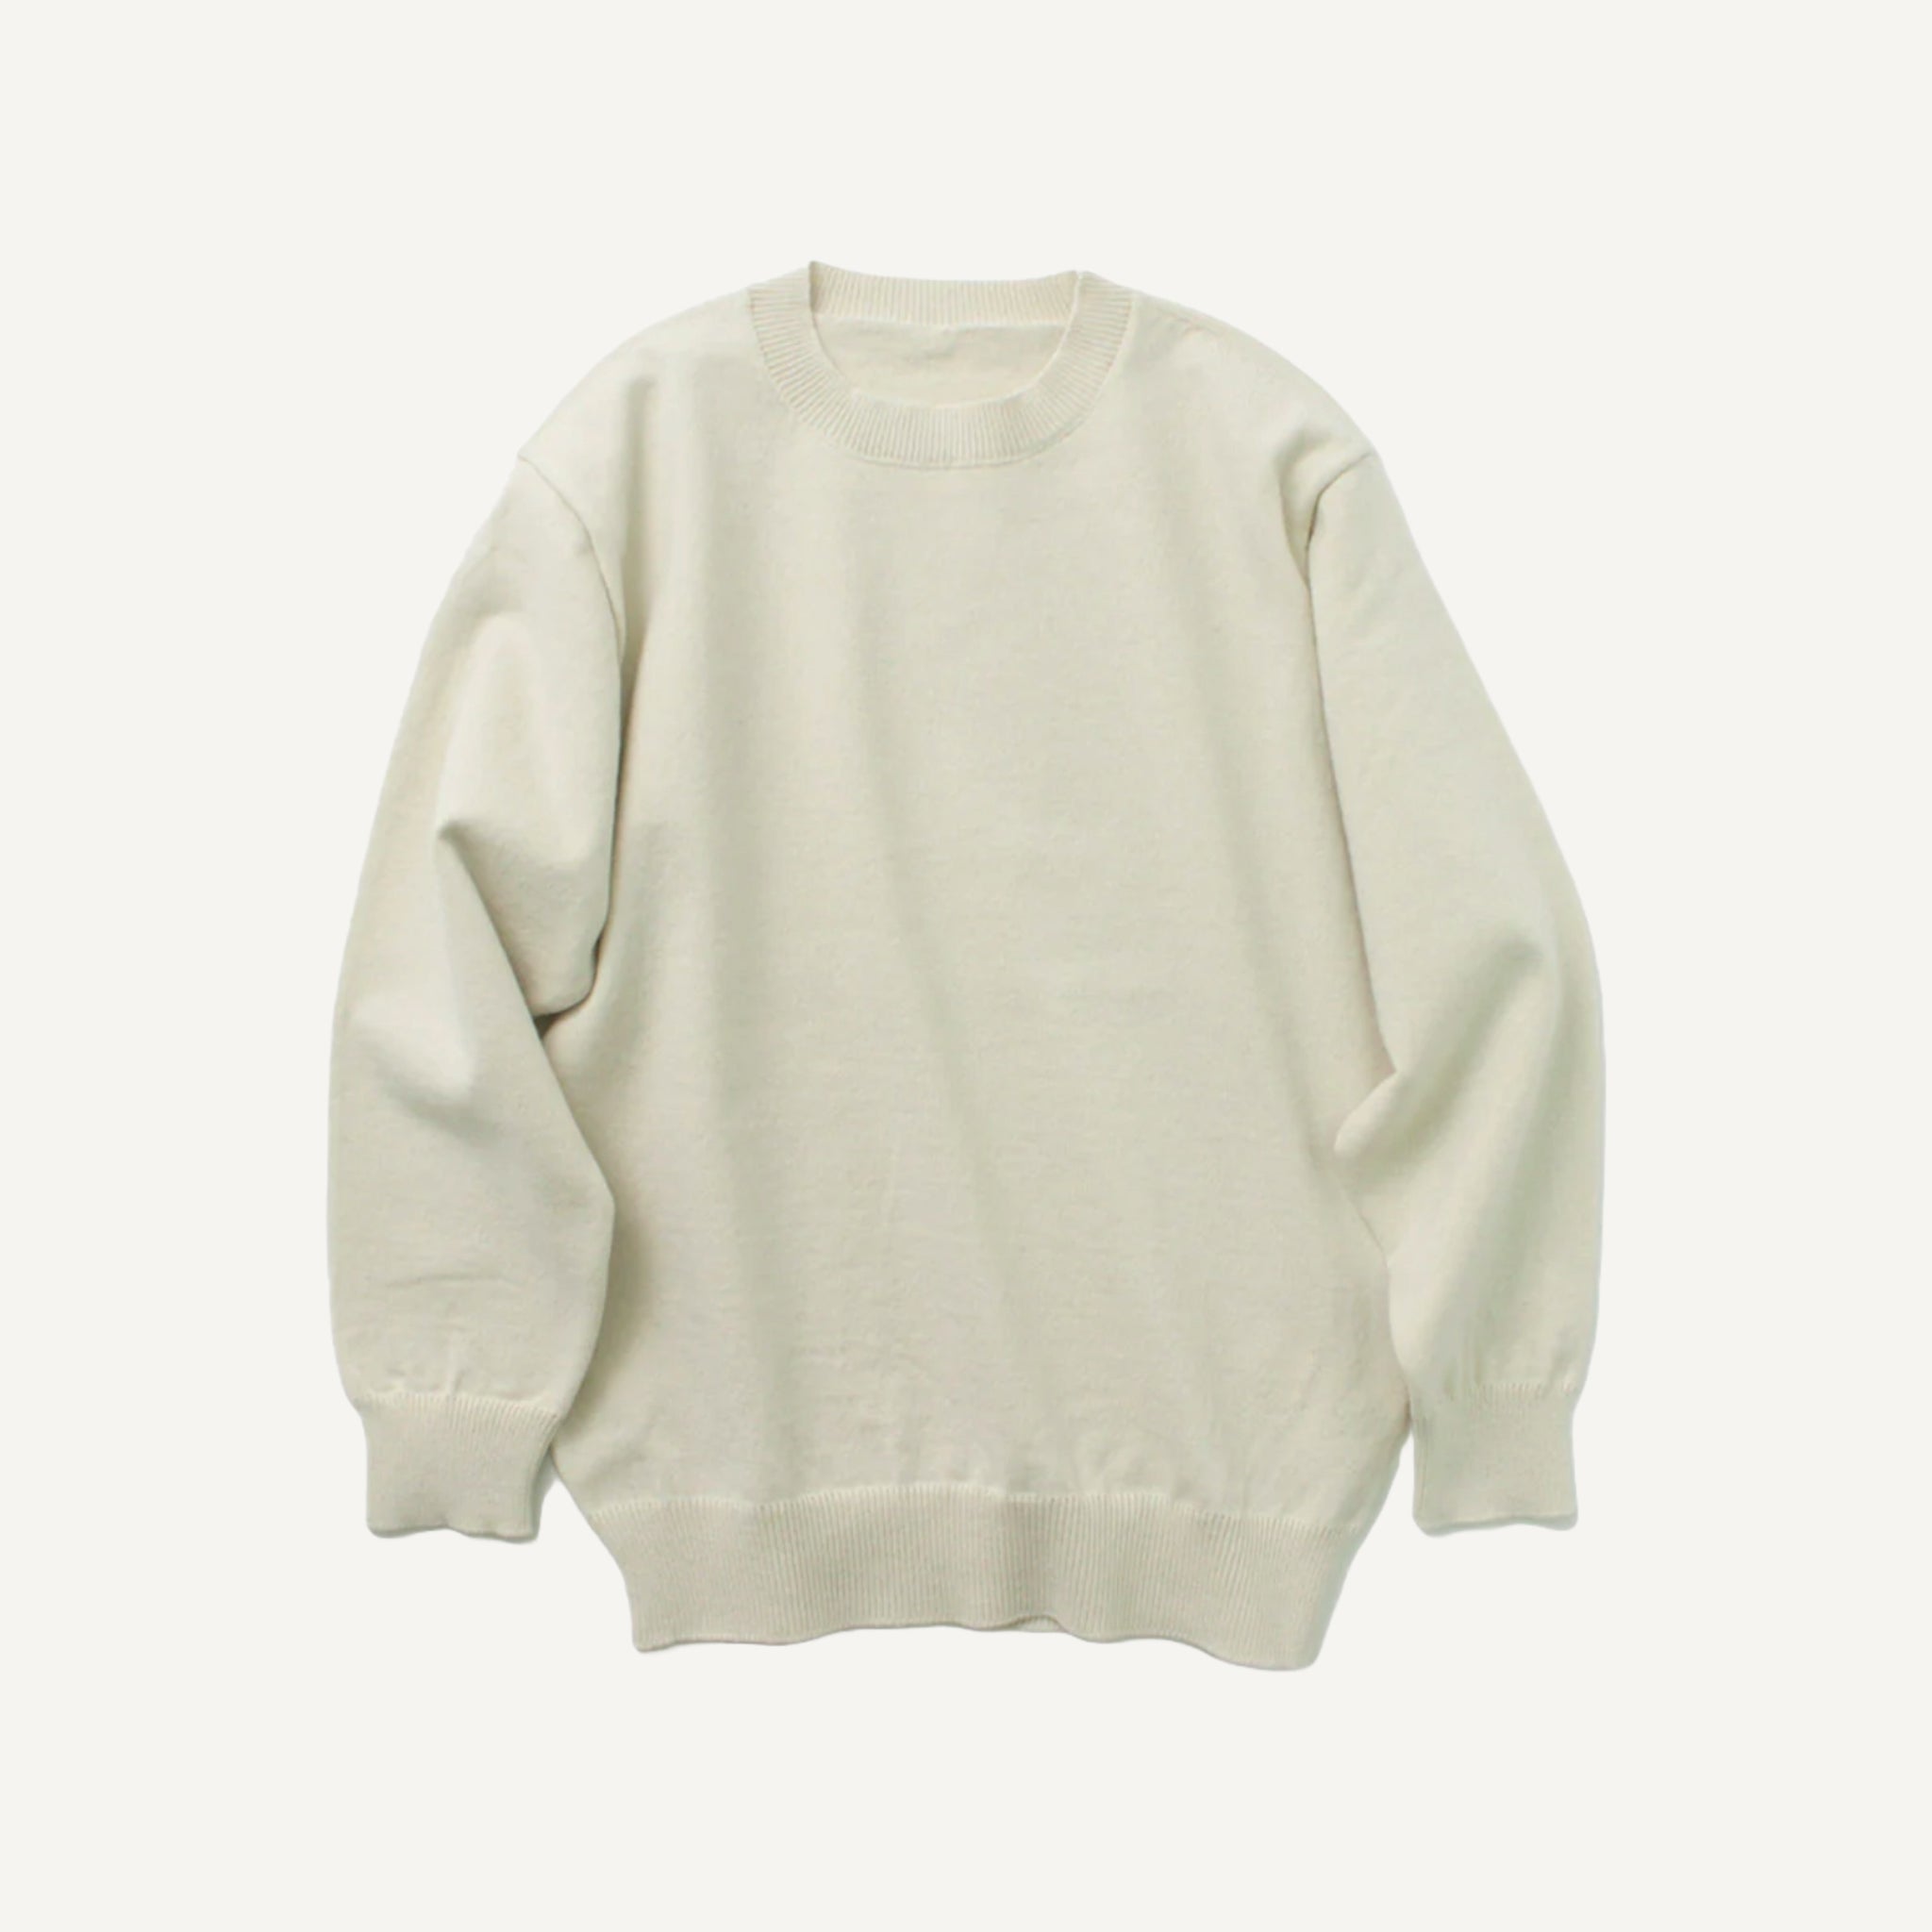 JAPANESE CASHMERE SWEATER